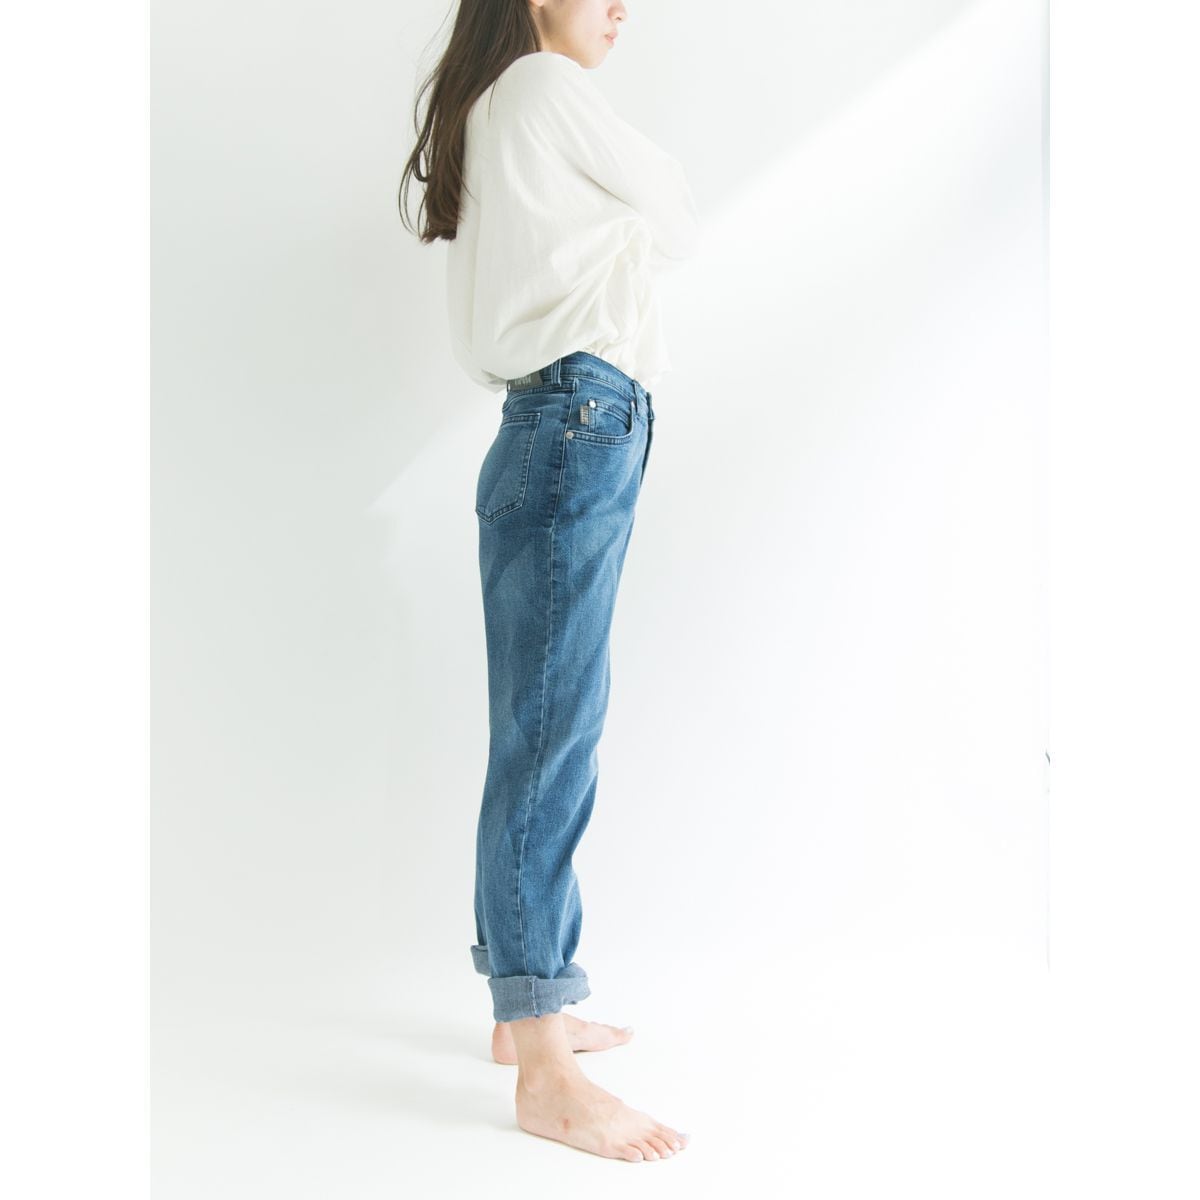 JEANS Les Copains】 Made in Italy straight jeans（レ・コパン ストレッチジーンズ デニム）8e |  MASCOT/E